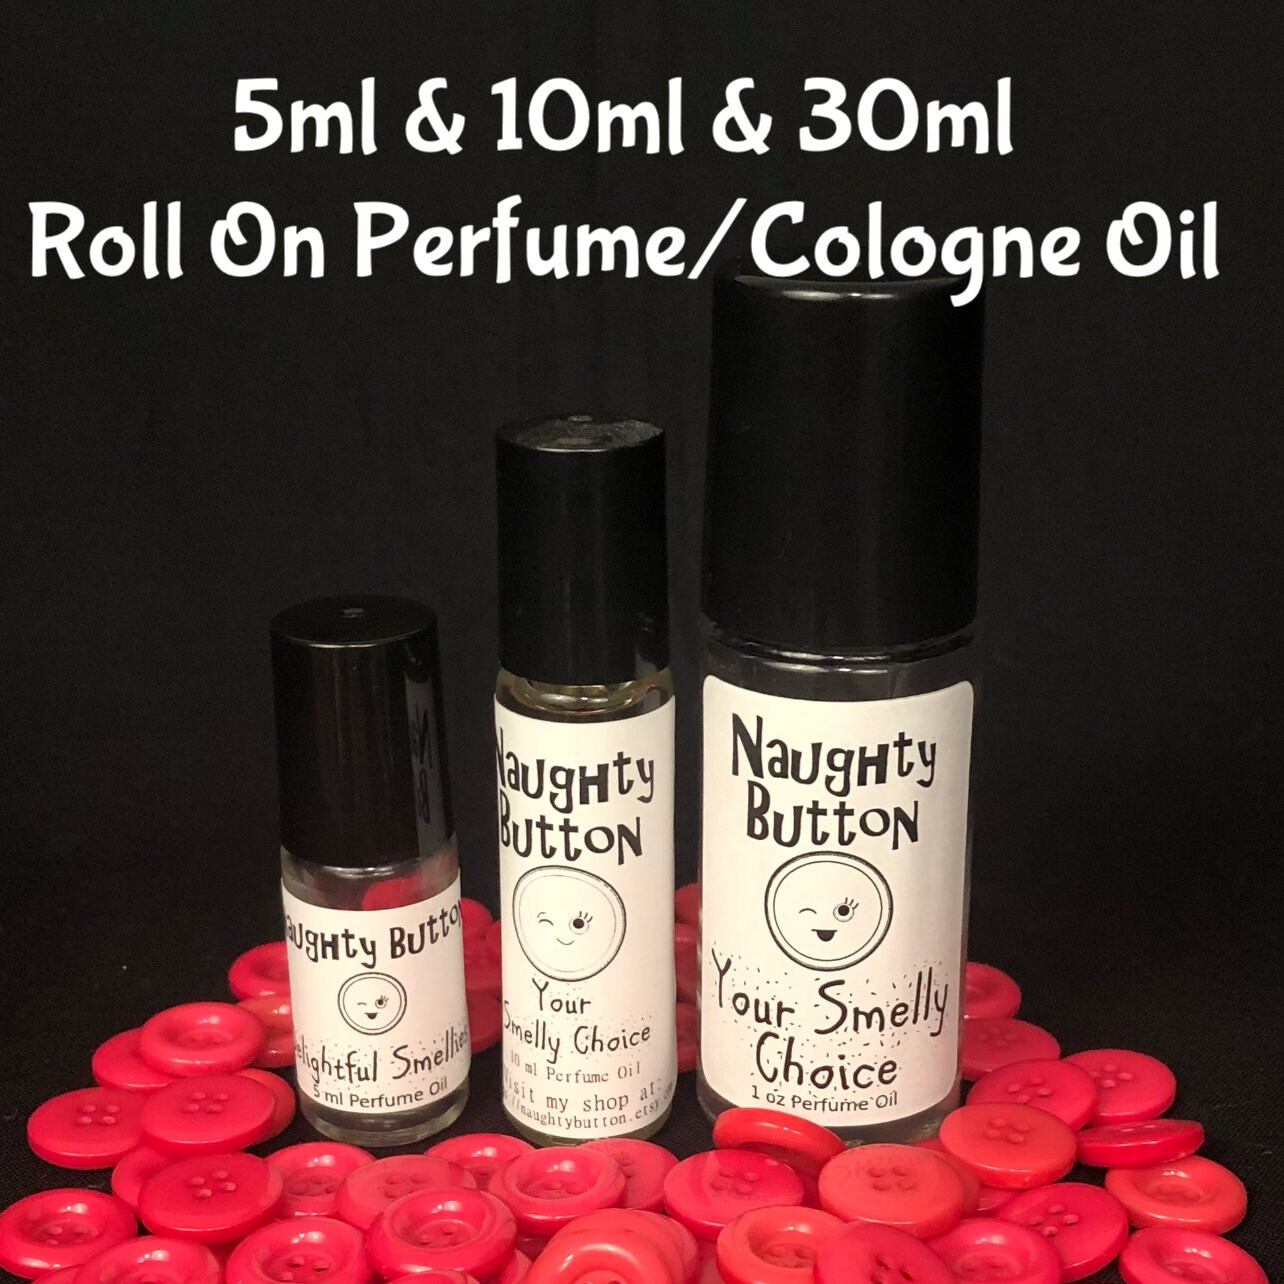  Sweet Grape Fragrance Oil (60ml) for Diffusers, Soap Making,  Candles, Lotion, Home Scents, Linen Spray, Bath Bombs, Slime : Arts, Crafts  & Sewing